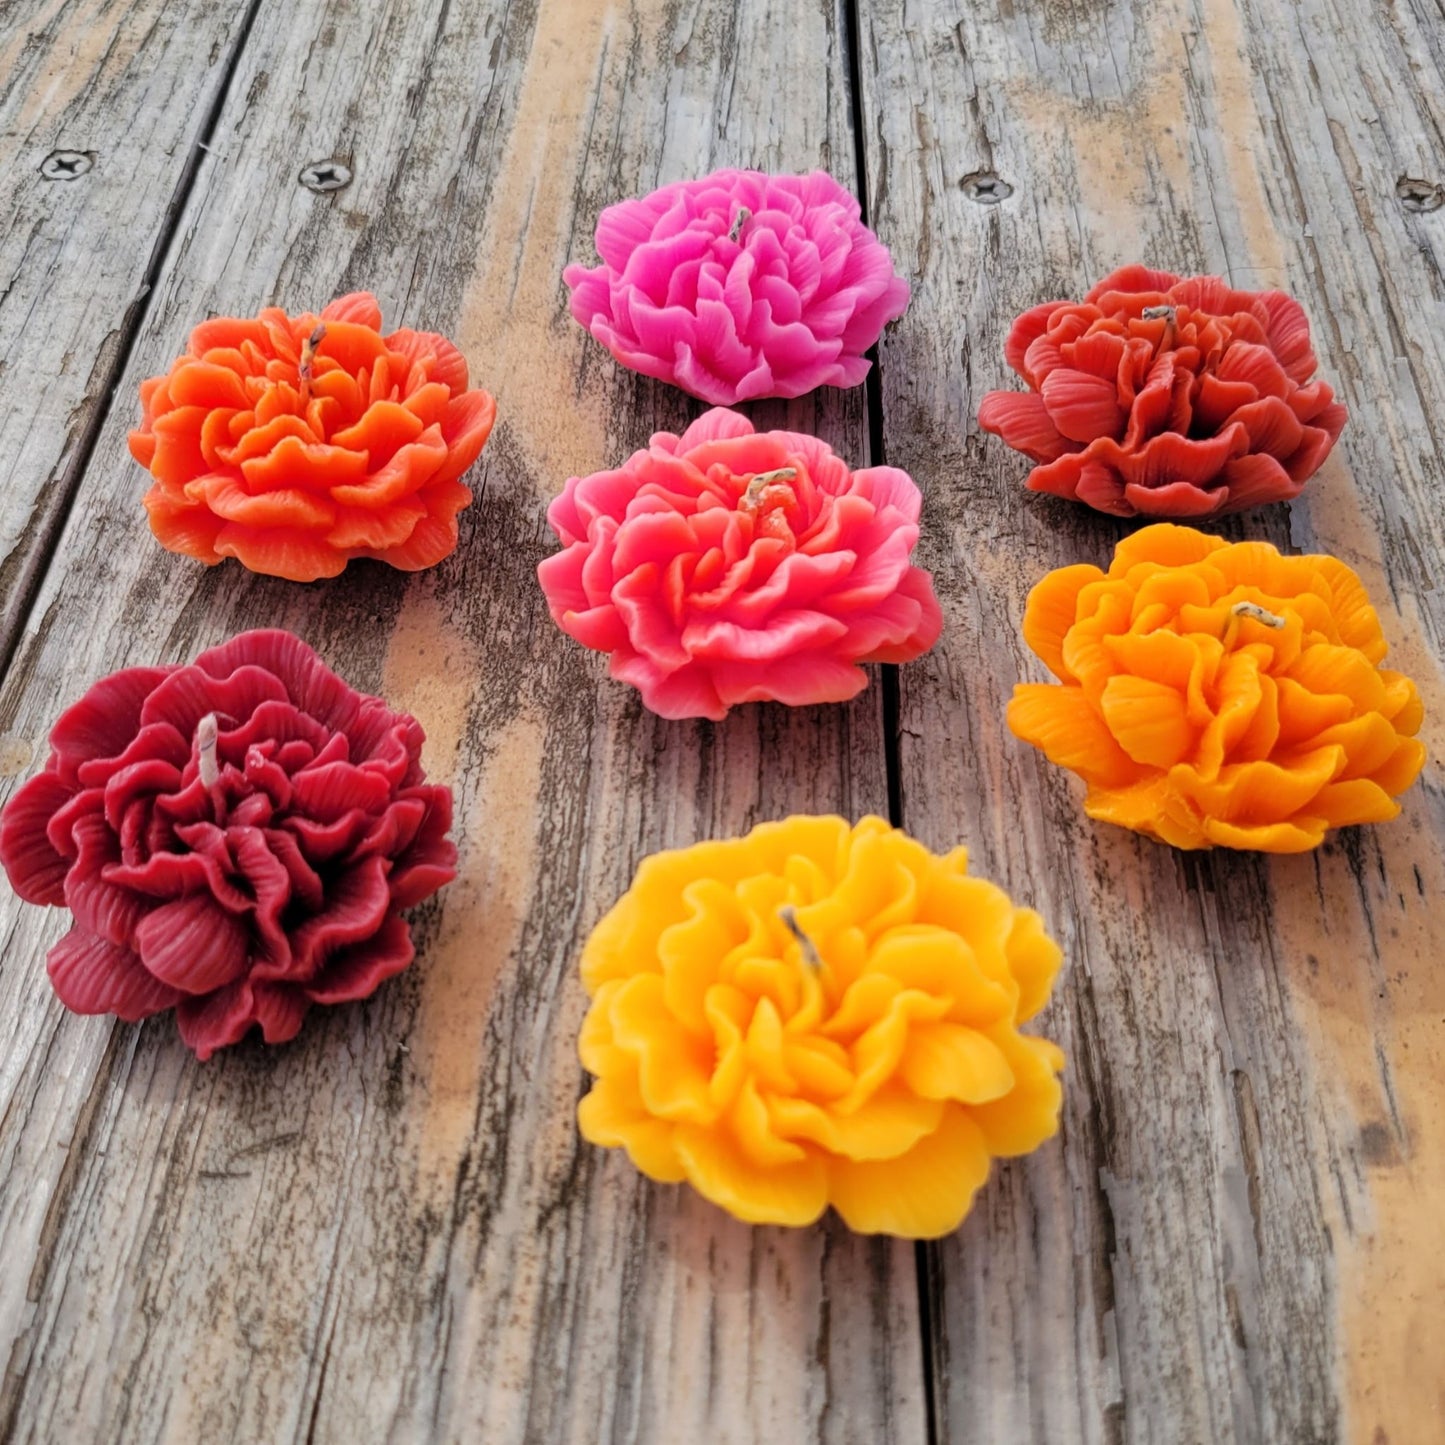 Seven handmade flower votive candles in a variety of colors.